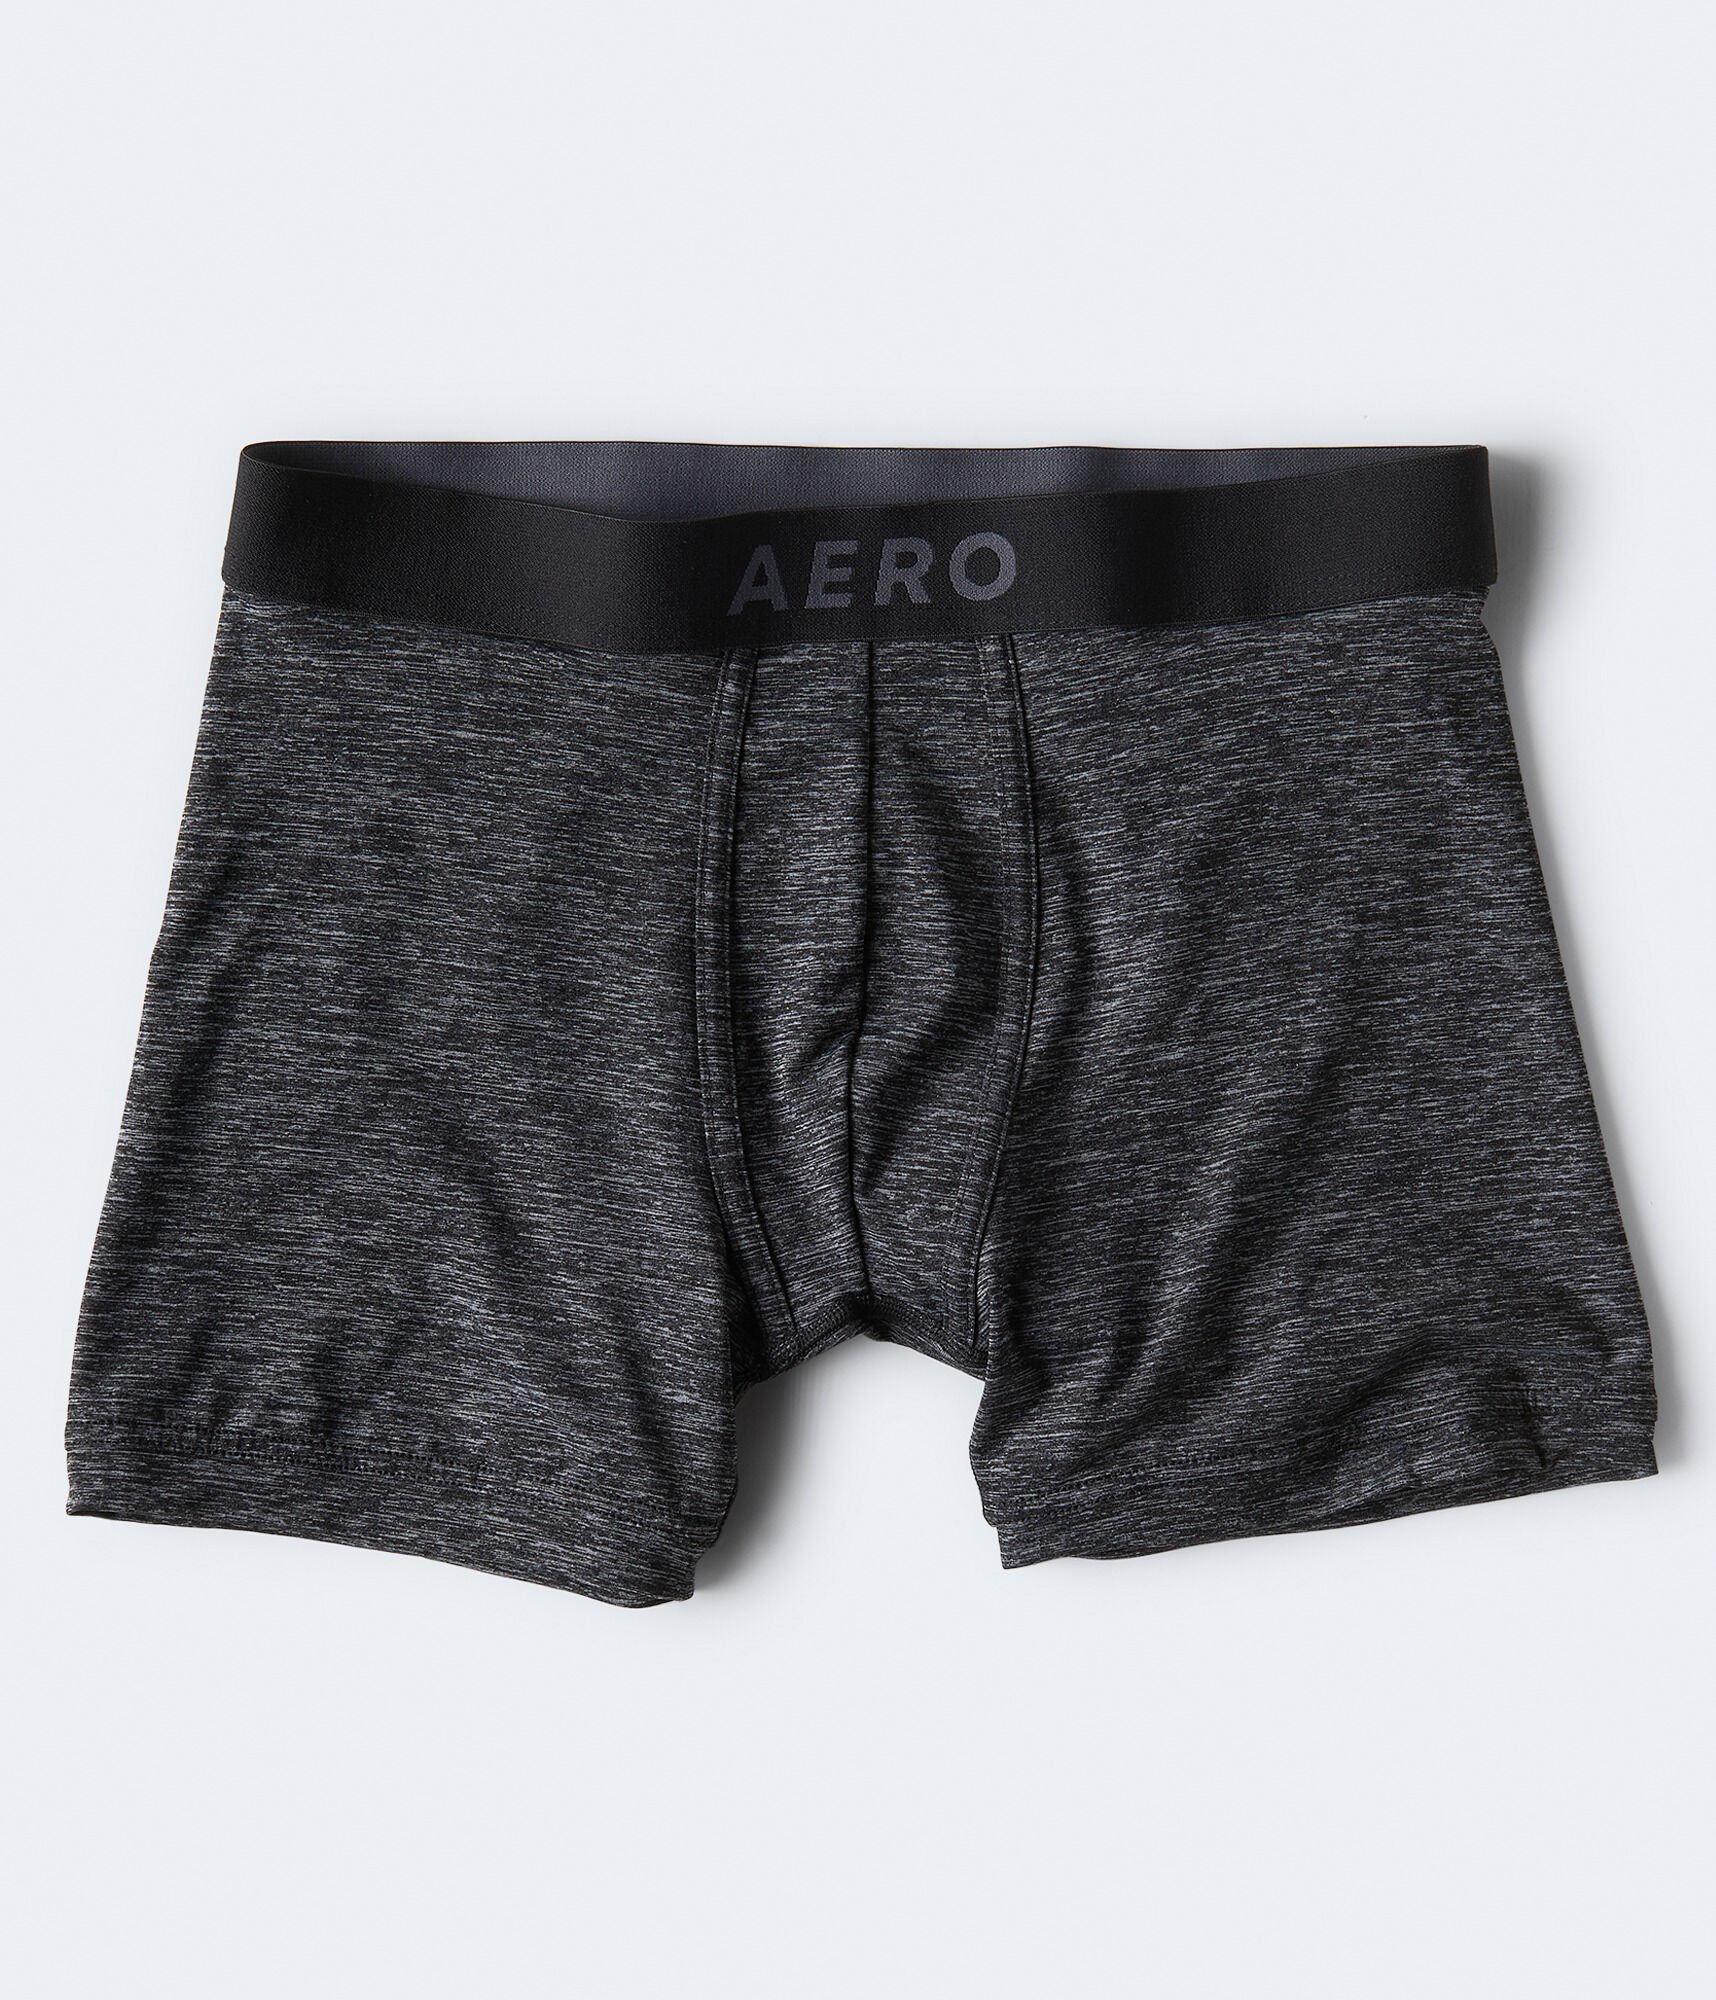 Space-Dyed Performance Knit Boxer Briefs